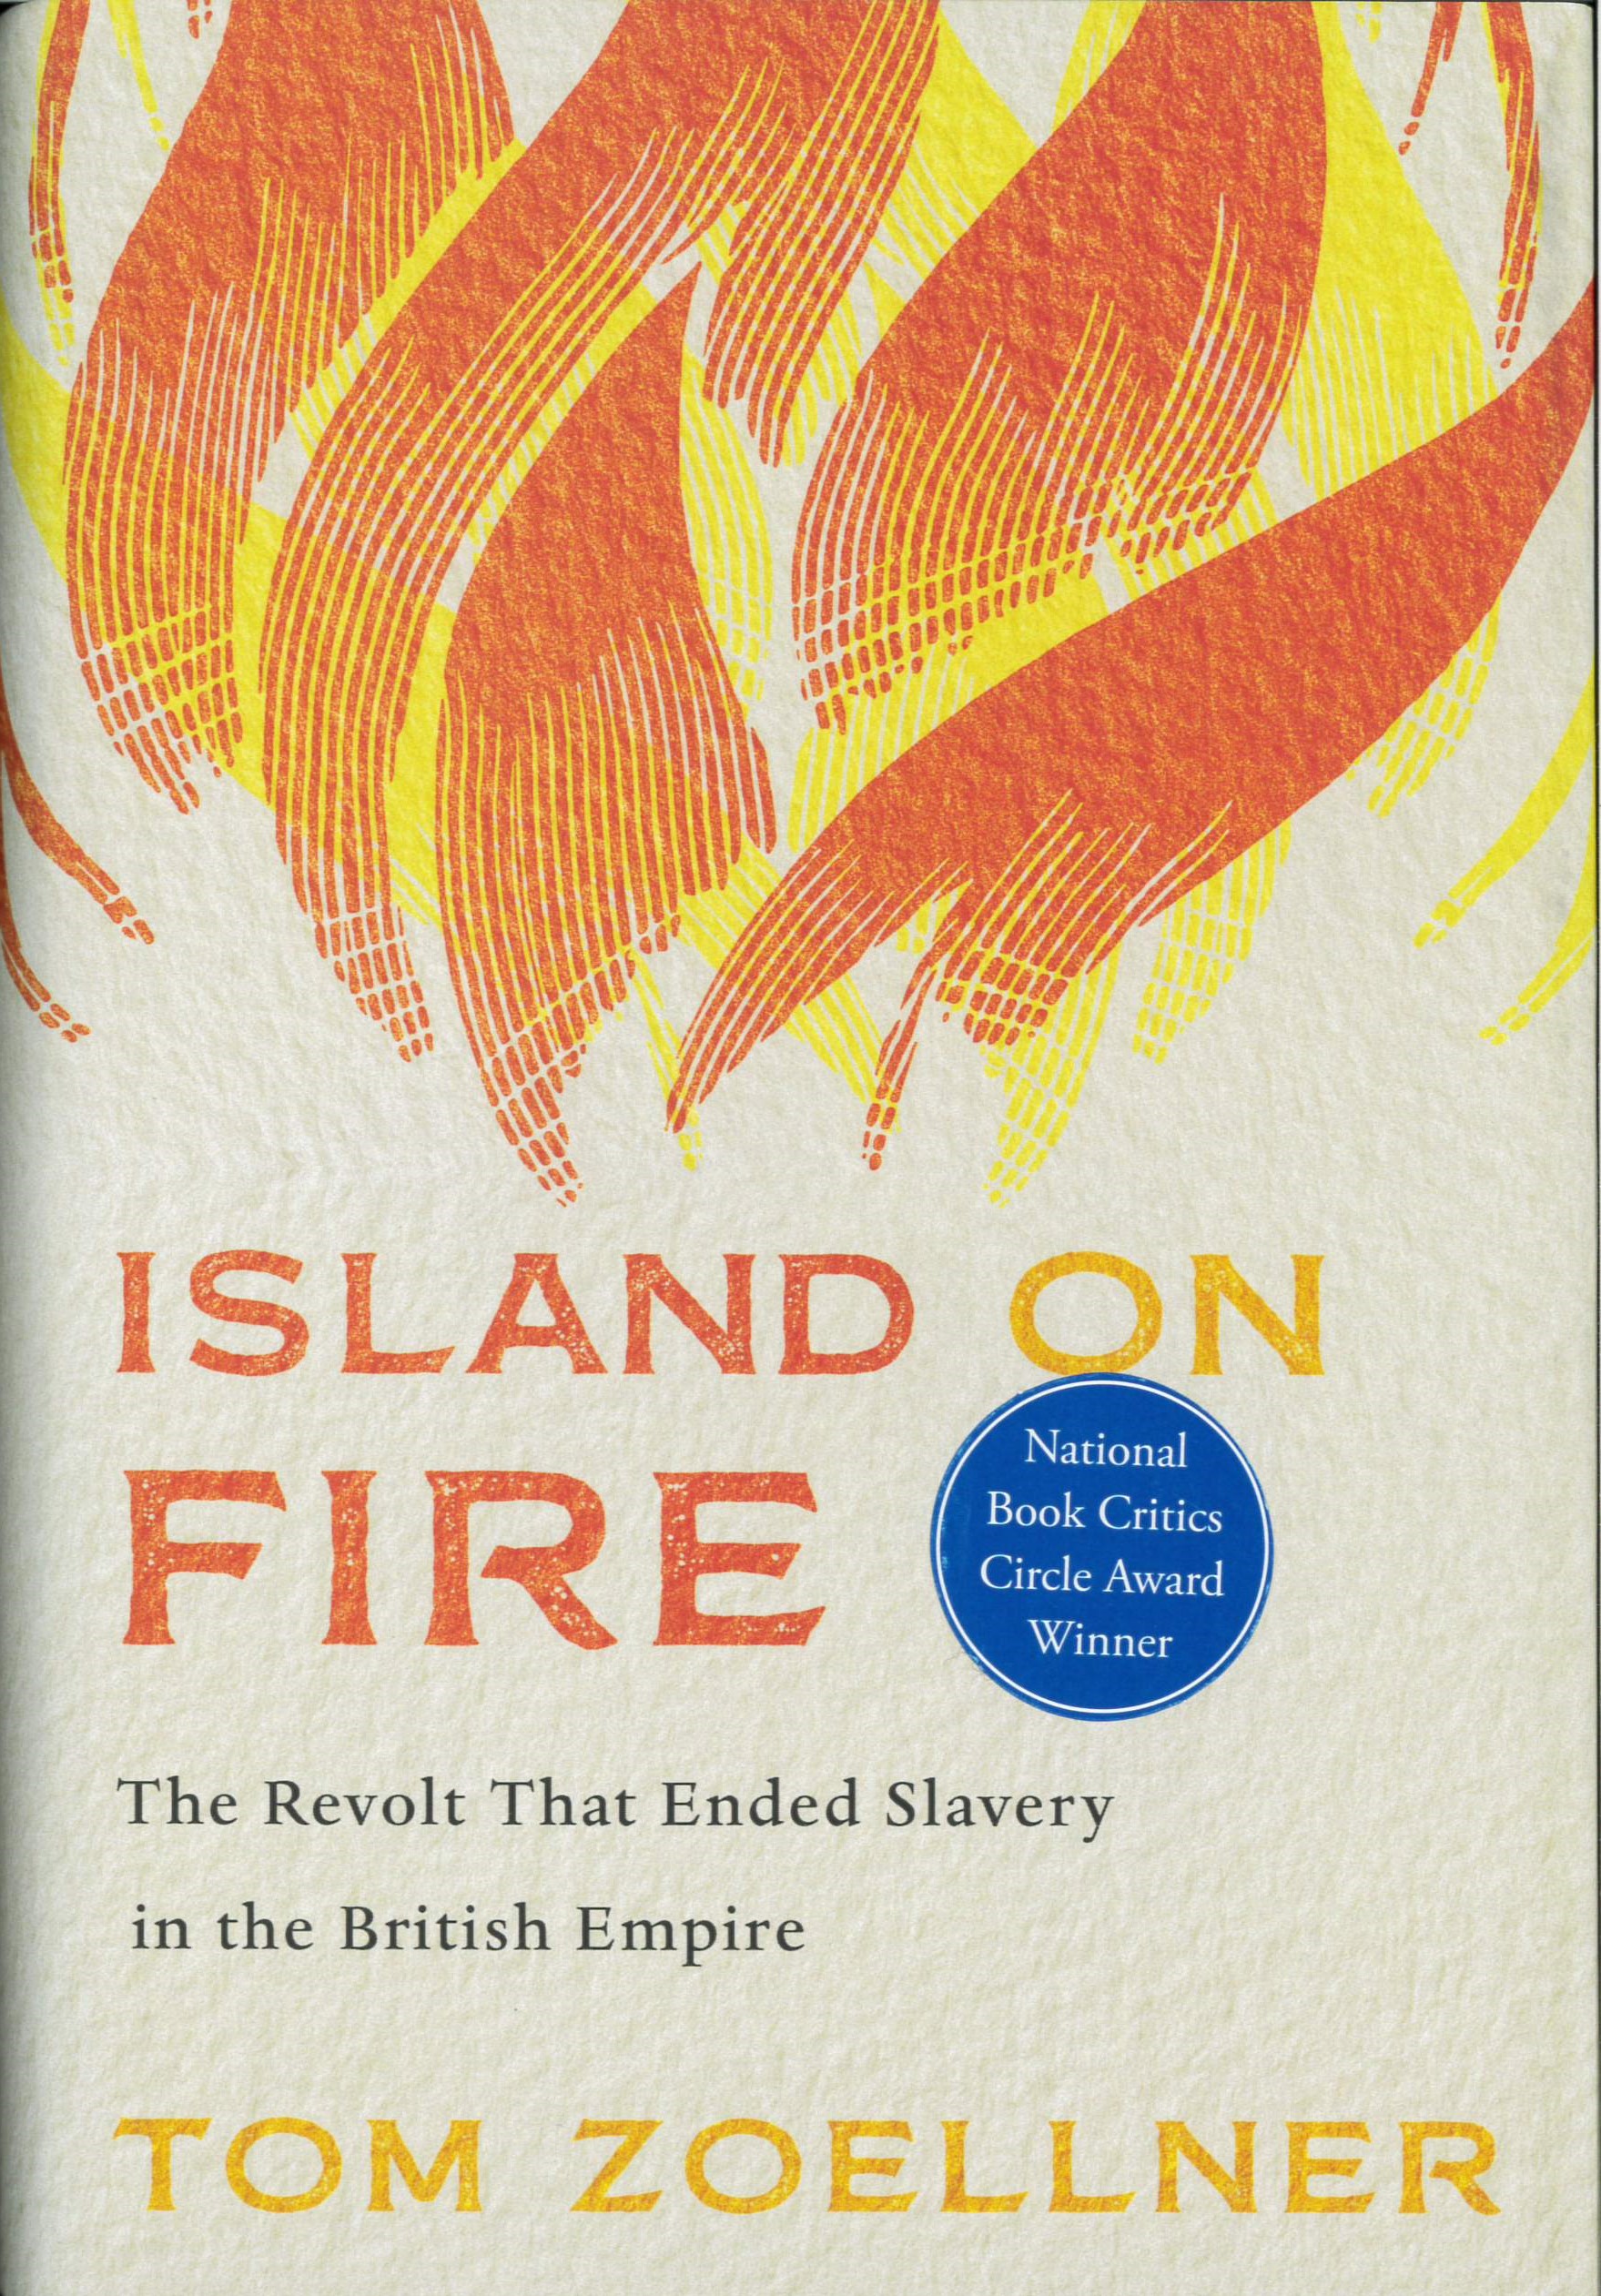 Island on fire : the revolt that ended slavery in the British Empire /